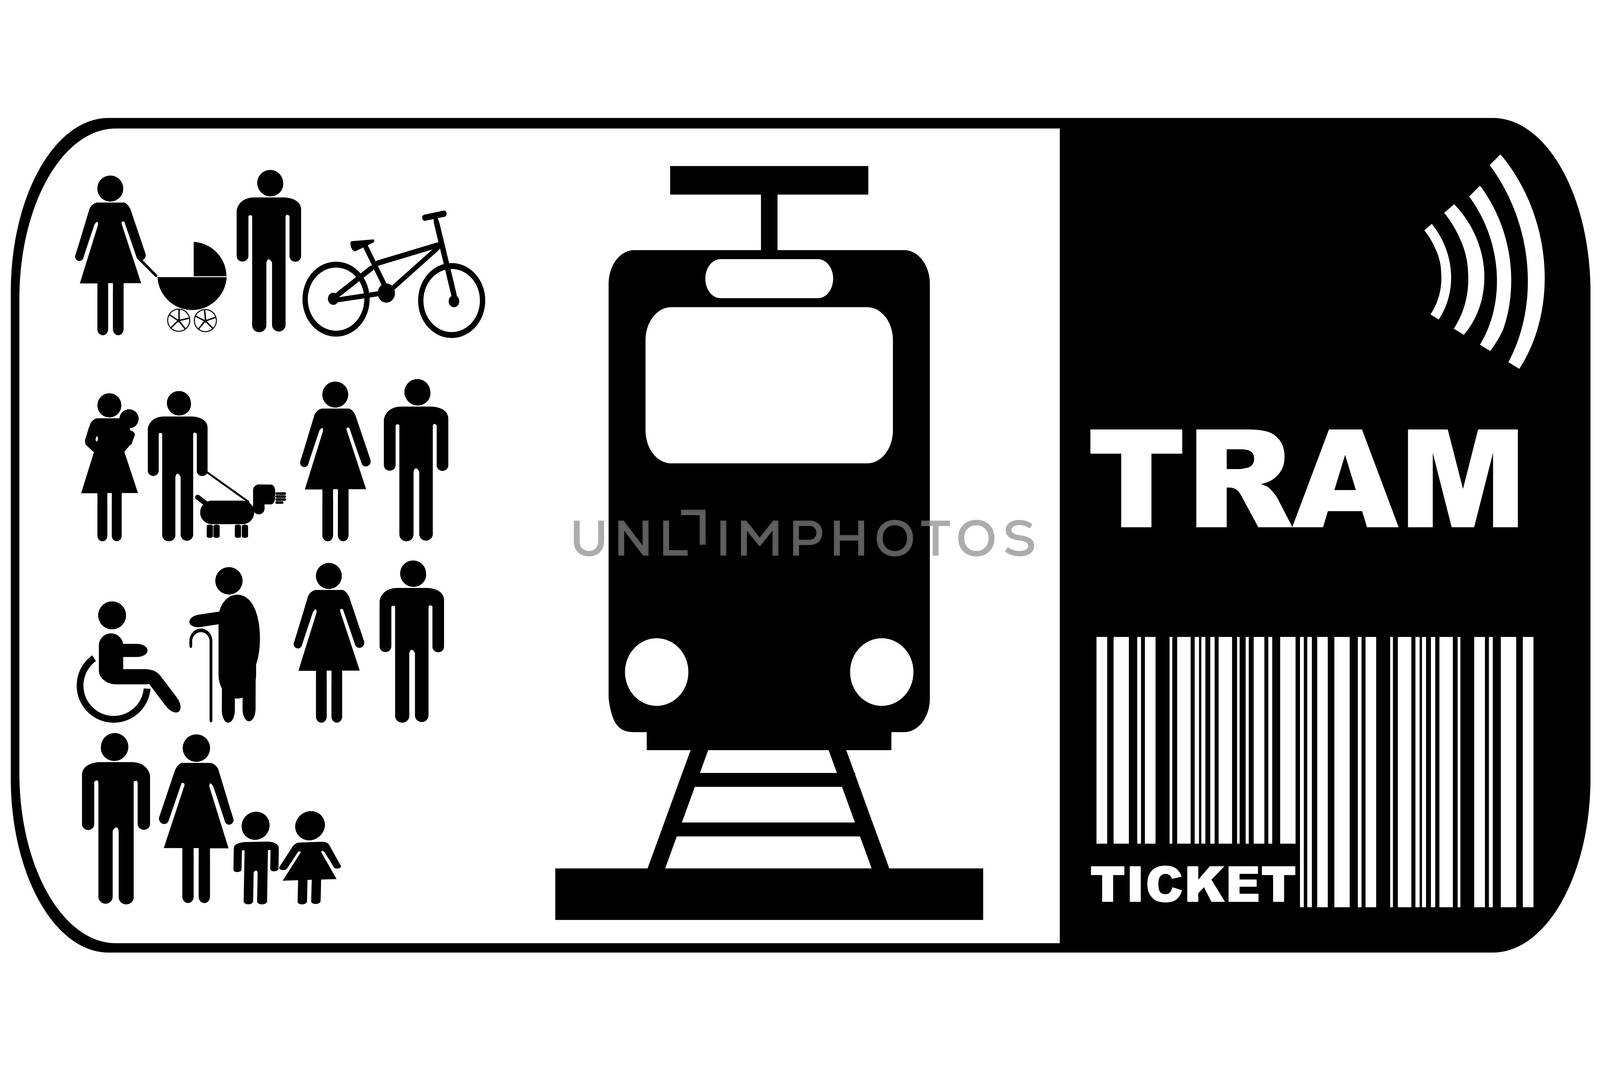 Tram ticket isolated on white background by hibrida13